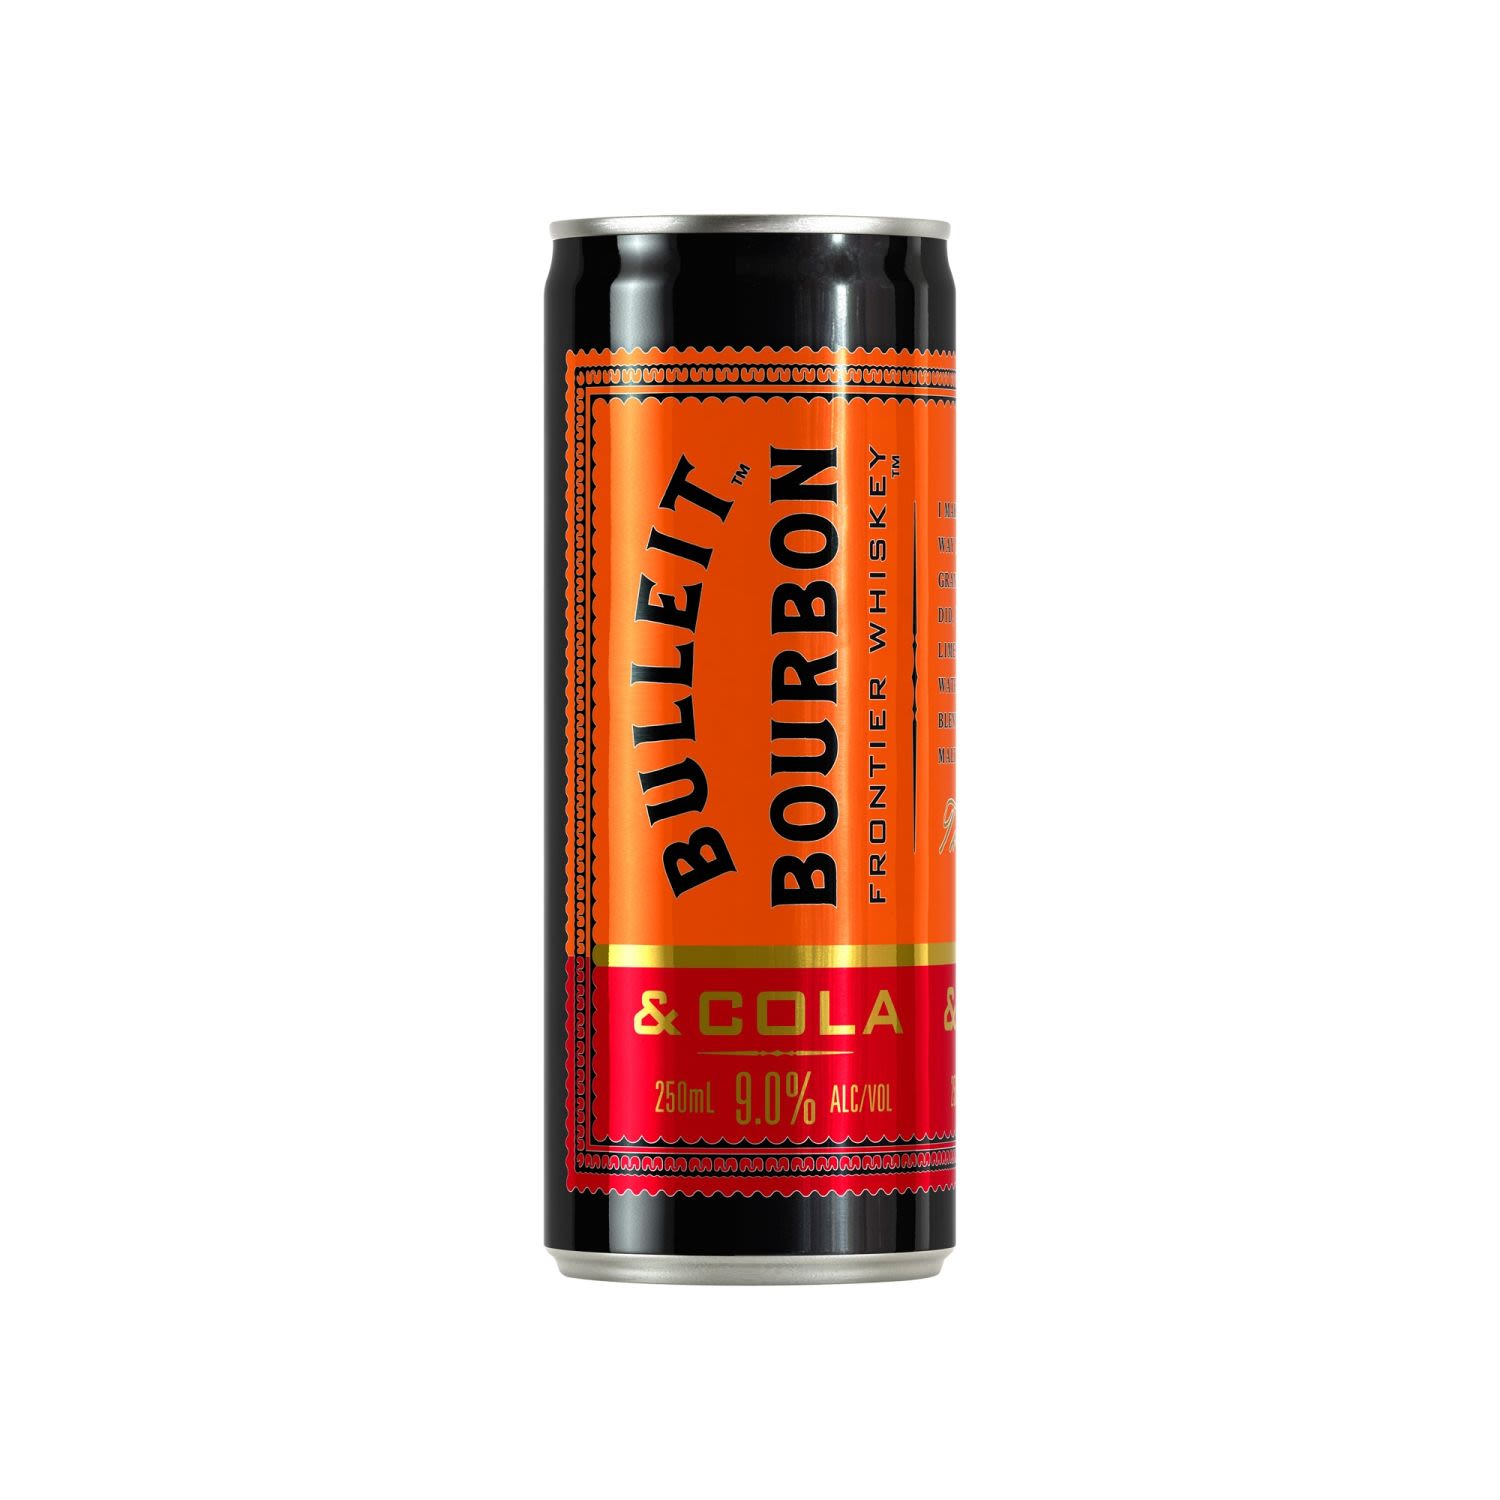 Bulleit Bourbon and Cola 9% Can 250mL